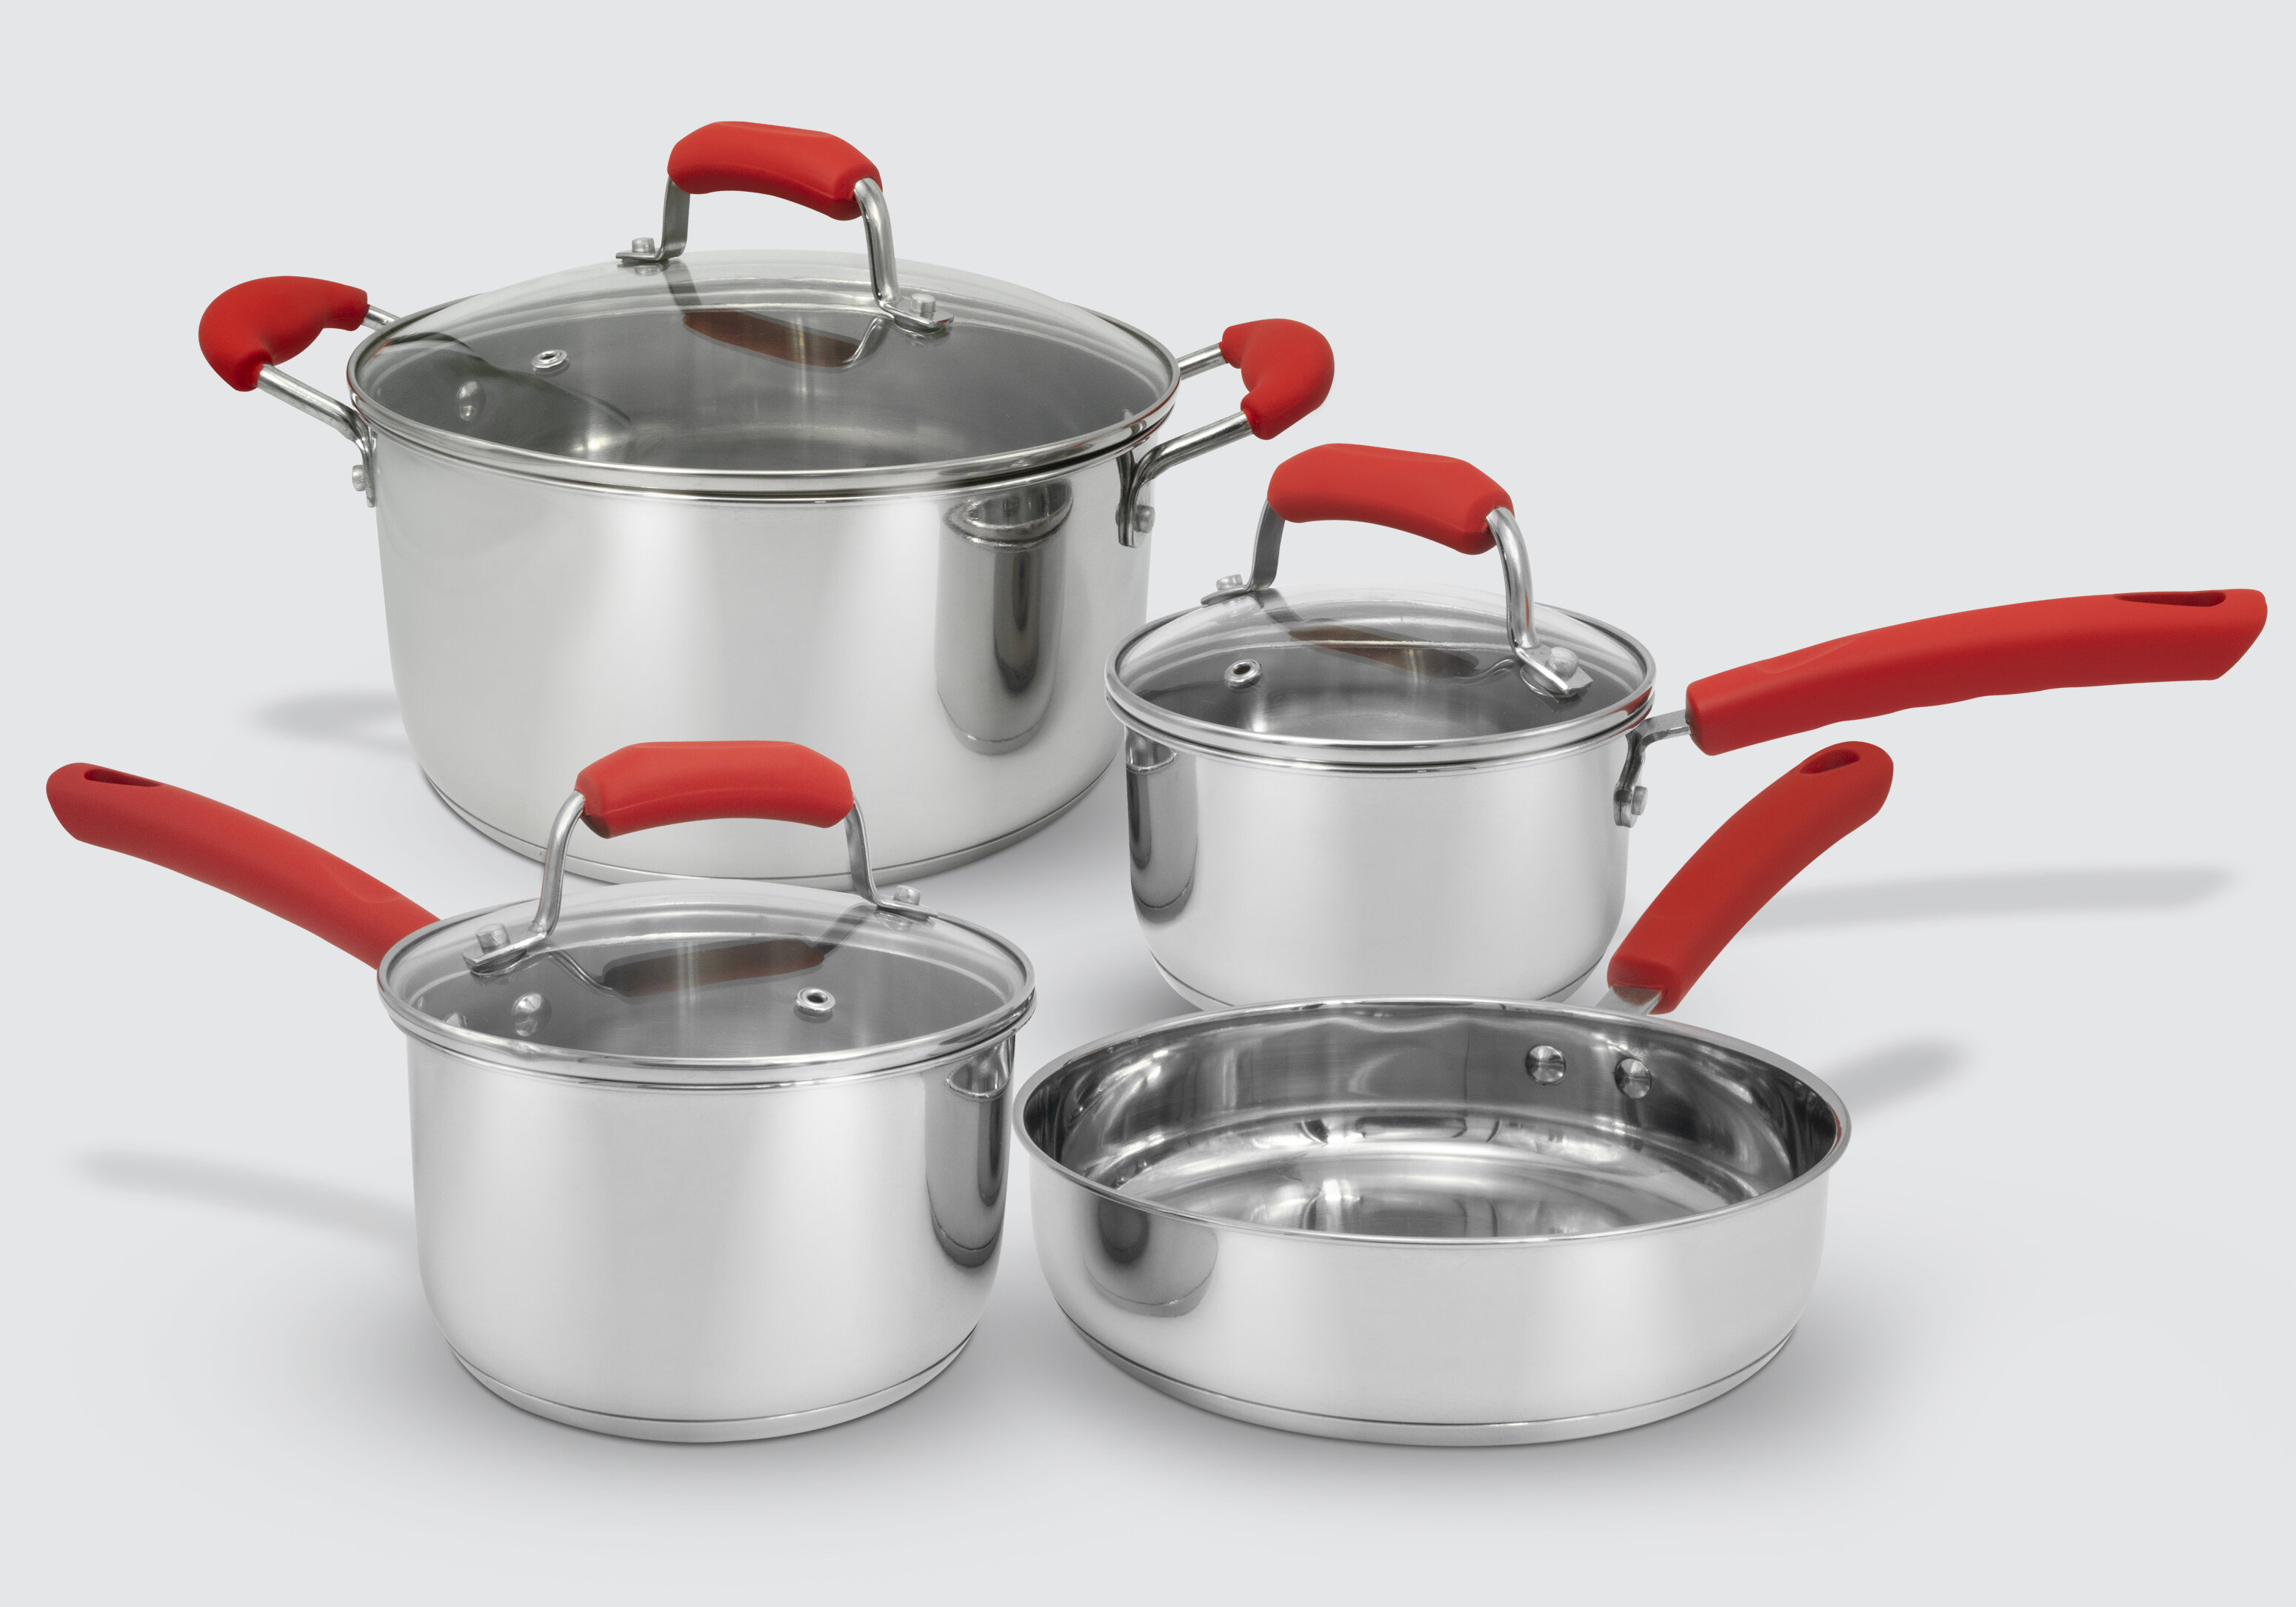 Rachael Ray 10 Piece Create Delicious Stainless Steel Cookware Set - Red